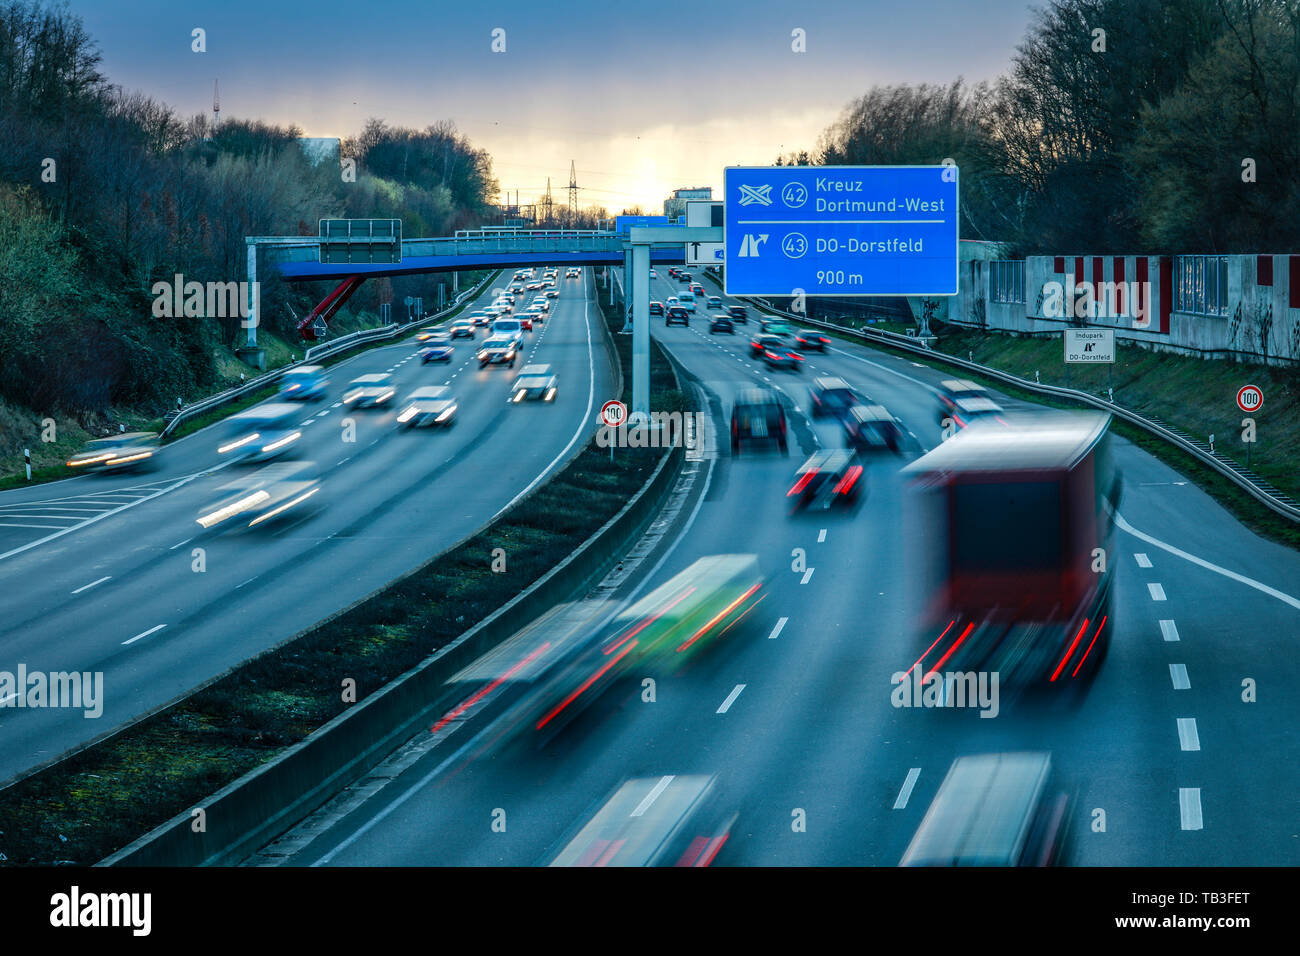 07.03.2019, Dortmund, North Rhine-Westphalia, Germany - Cars in the evening traffic on the Ruhr motorway A40 in the evening twilight at the intersecti Stock Photo